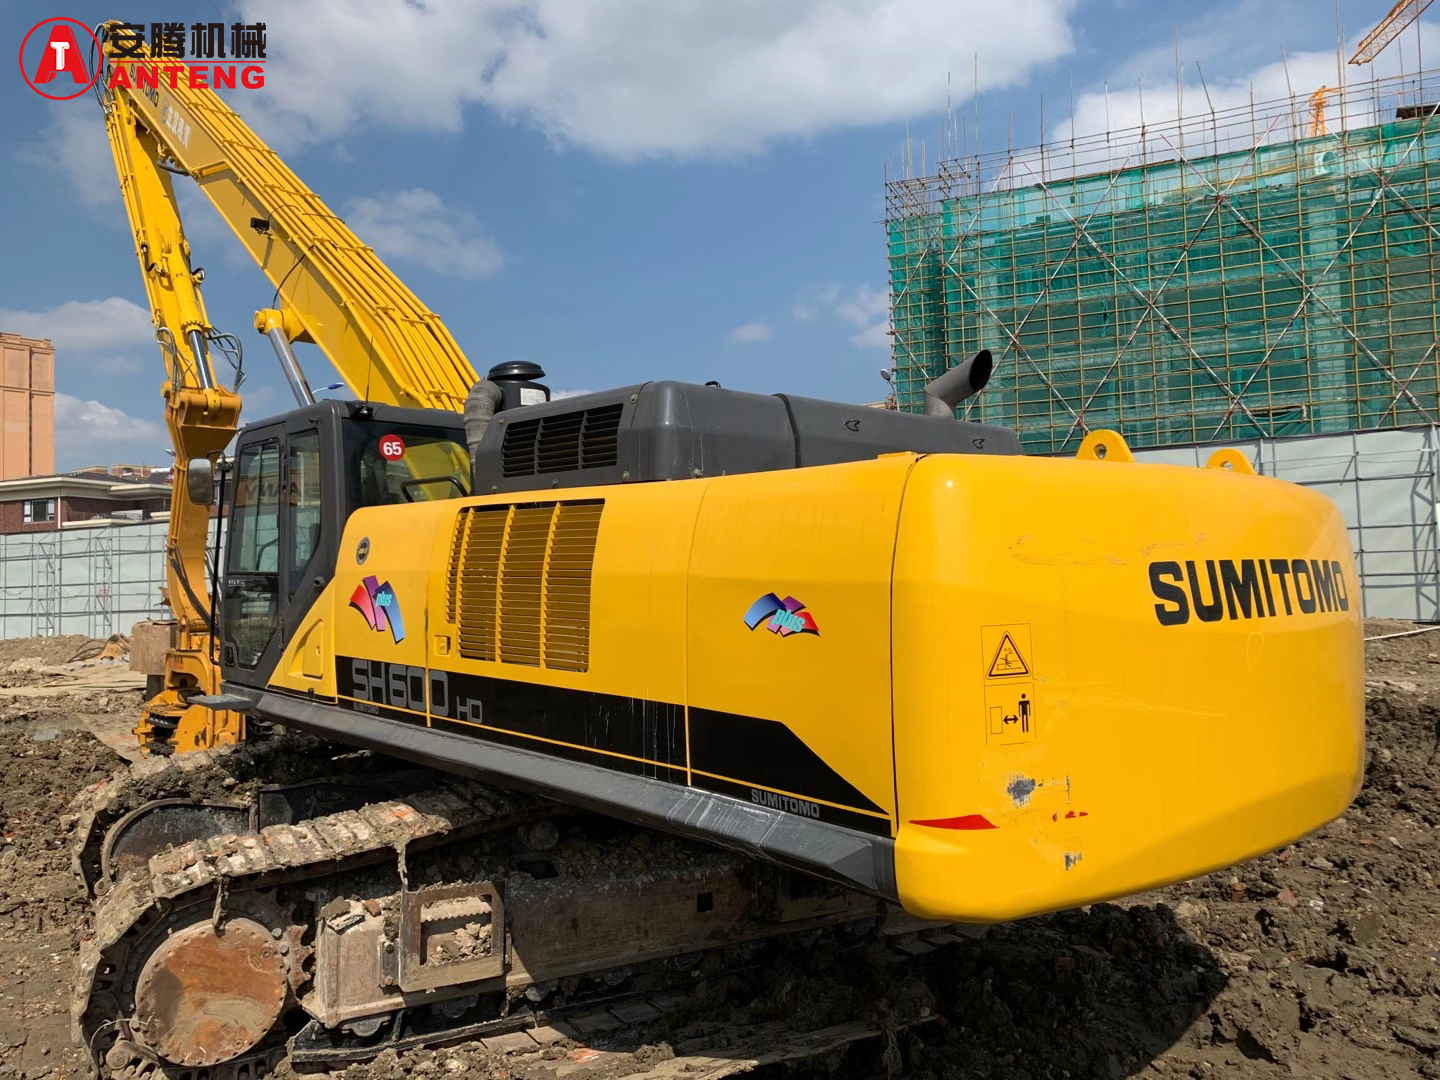 Anteng Vibro Hammer with Sumitomo for Wharf Project